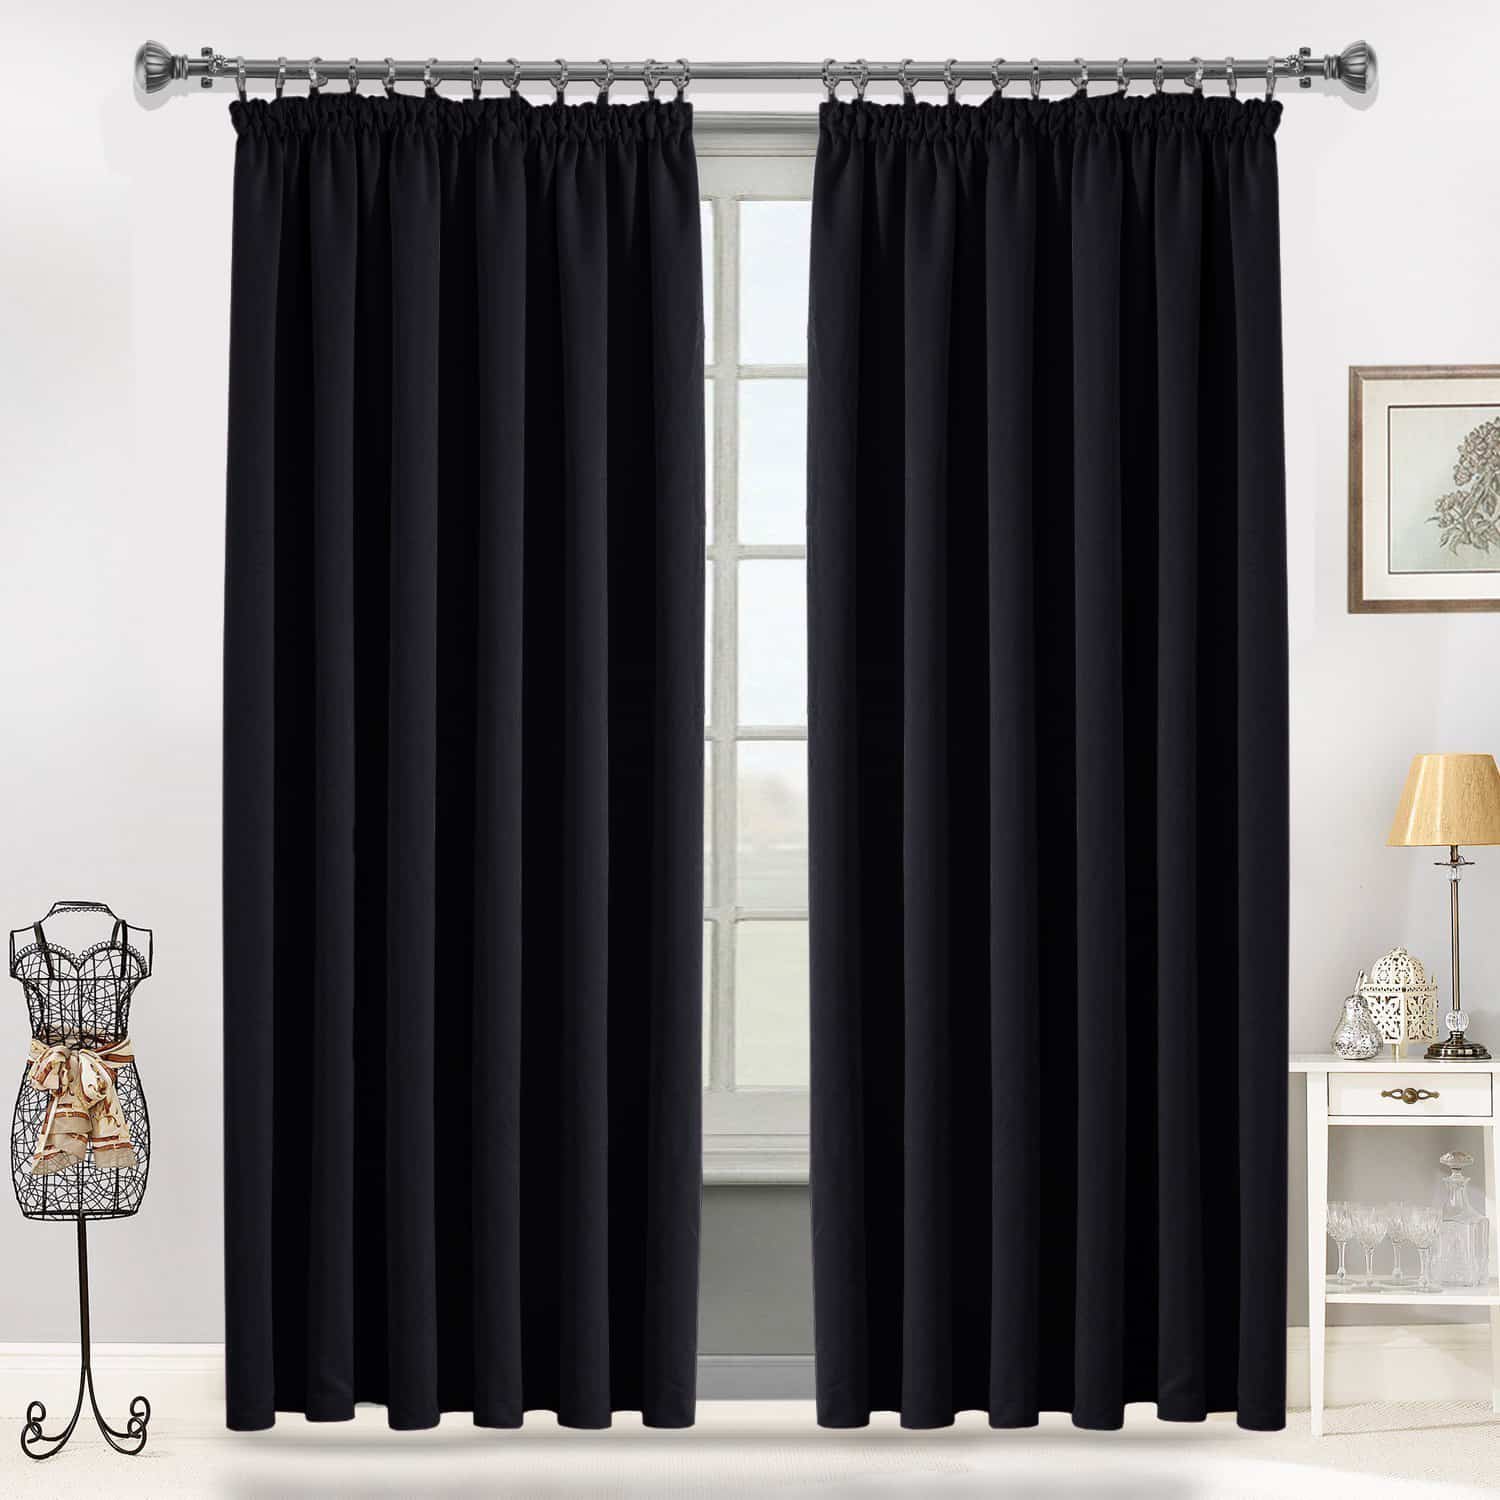 How to Choose Curtains for Perfect Home Décor